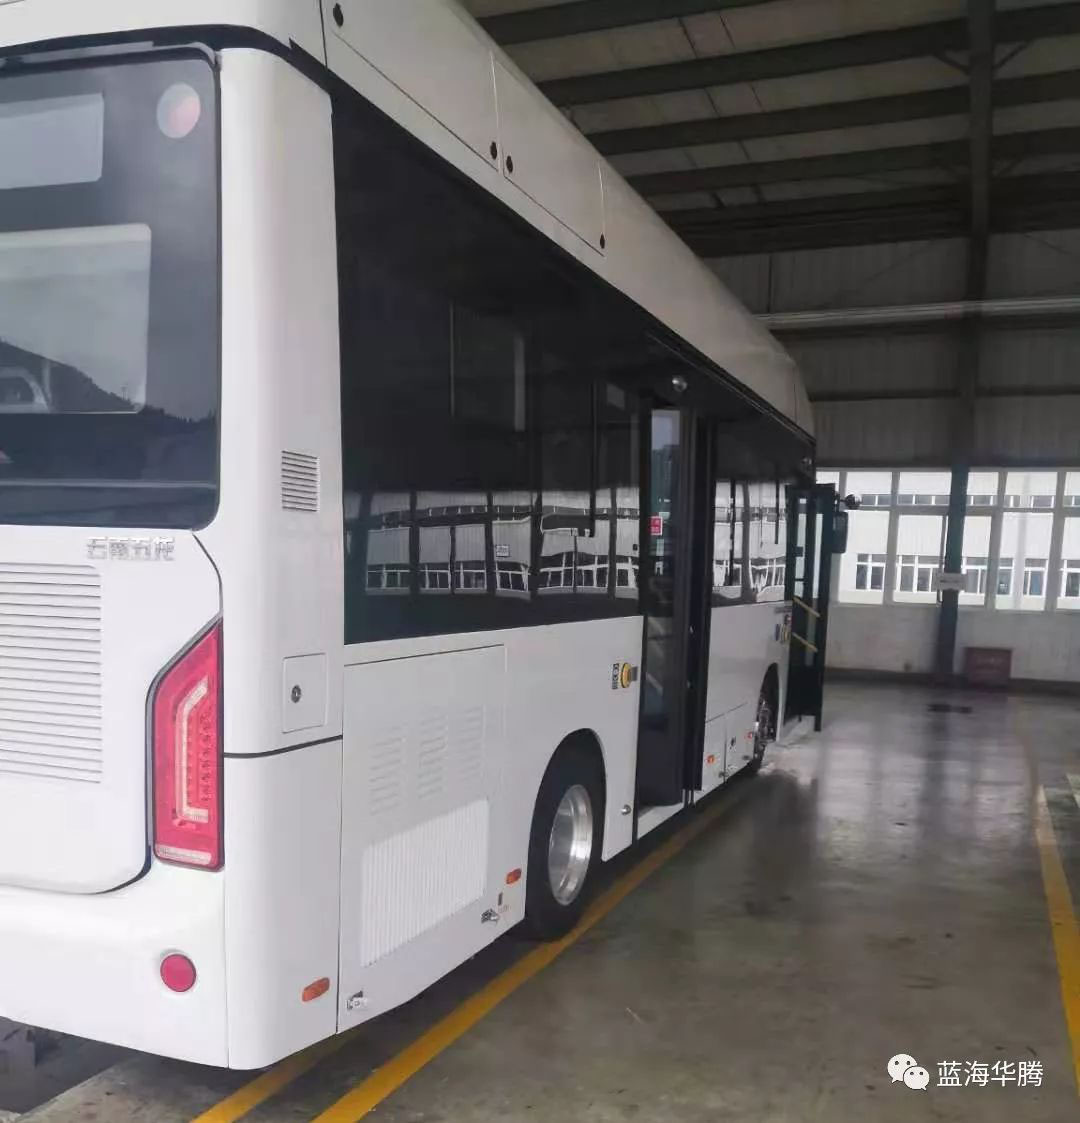 V&T Assists WuLong Automobile to Win the World's Largest Order of Hydrogen Energy Bus